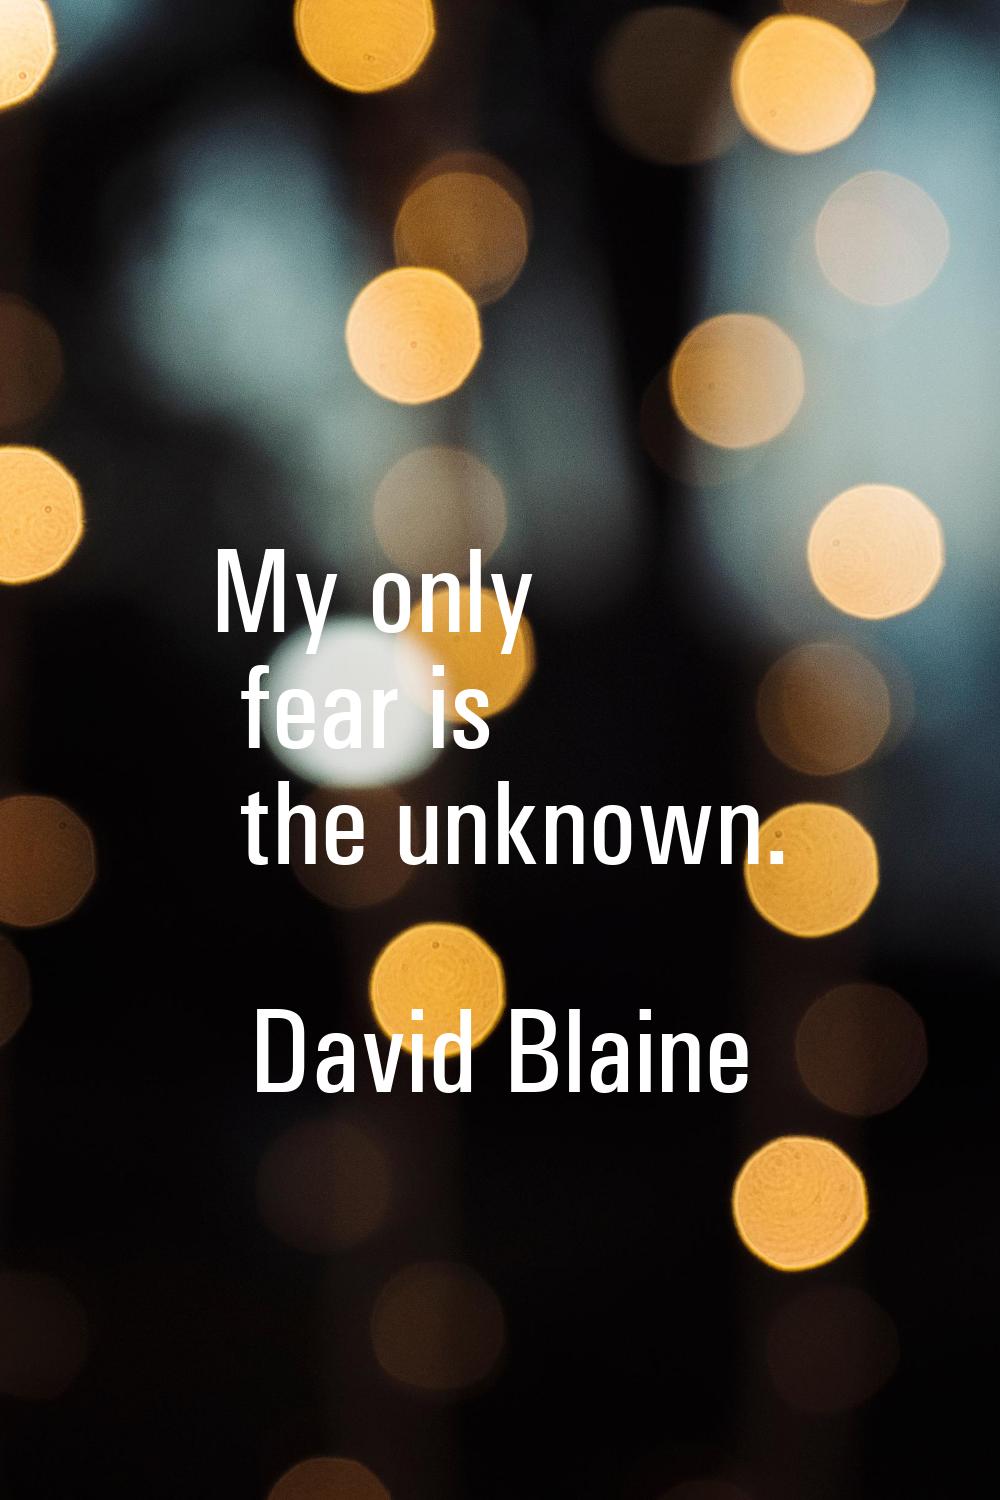 My only fear is the unknown.